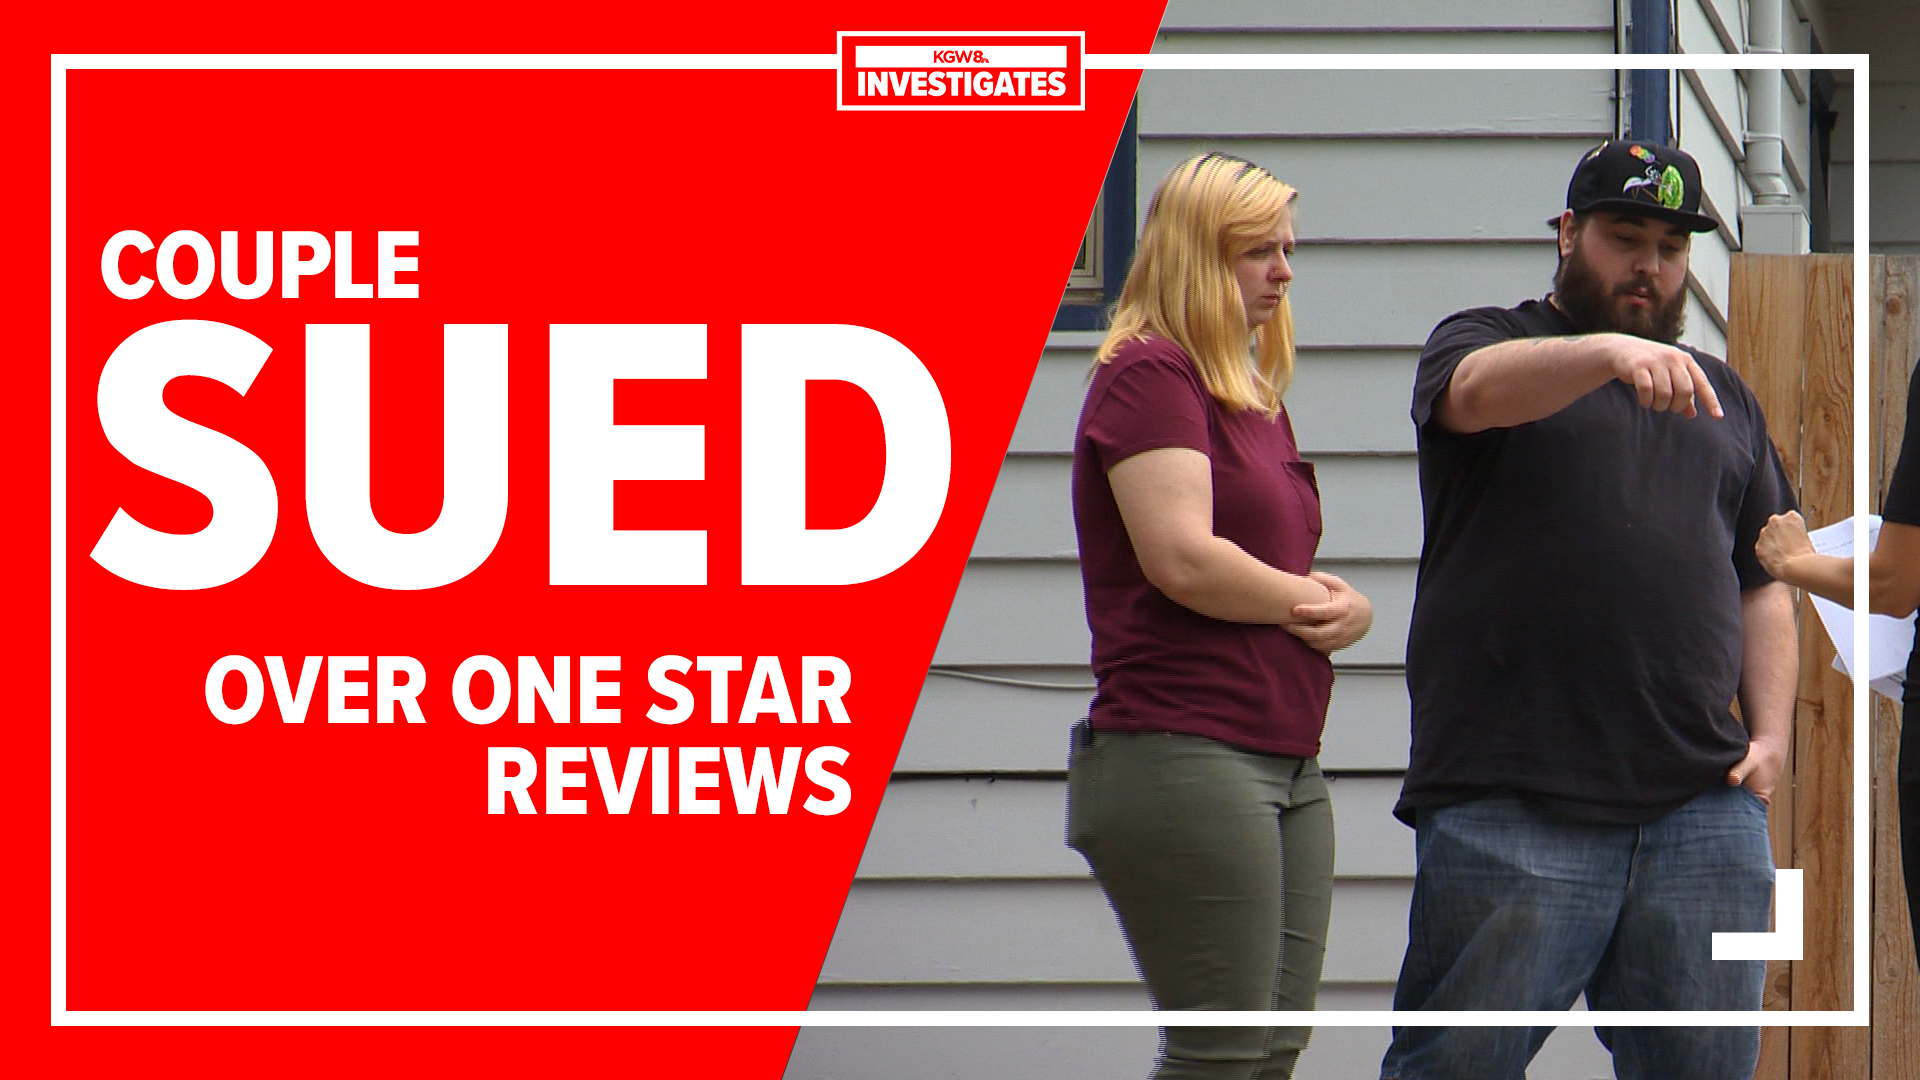 The Vancouver couple both left reviews about a bad experience with a roofing company and were later served with a lawsuit over those reviews.